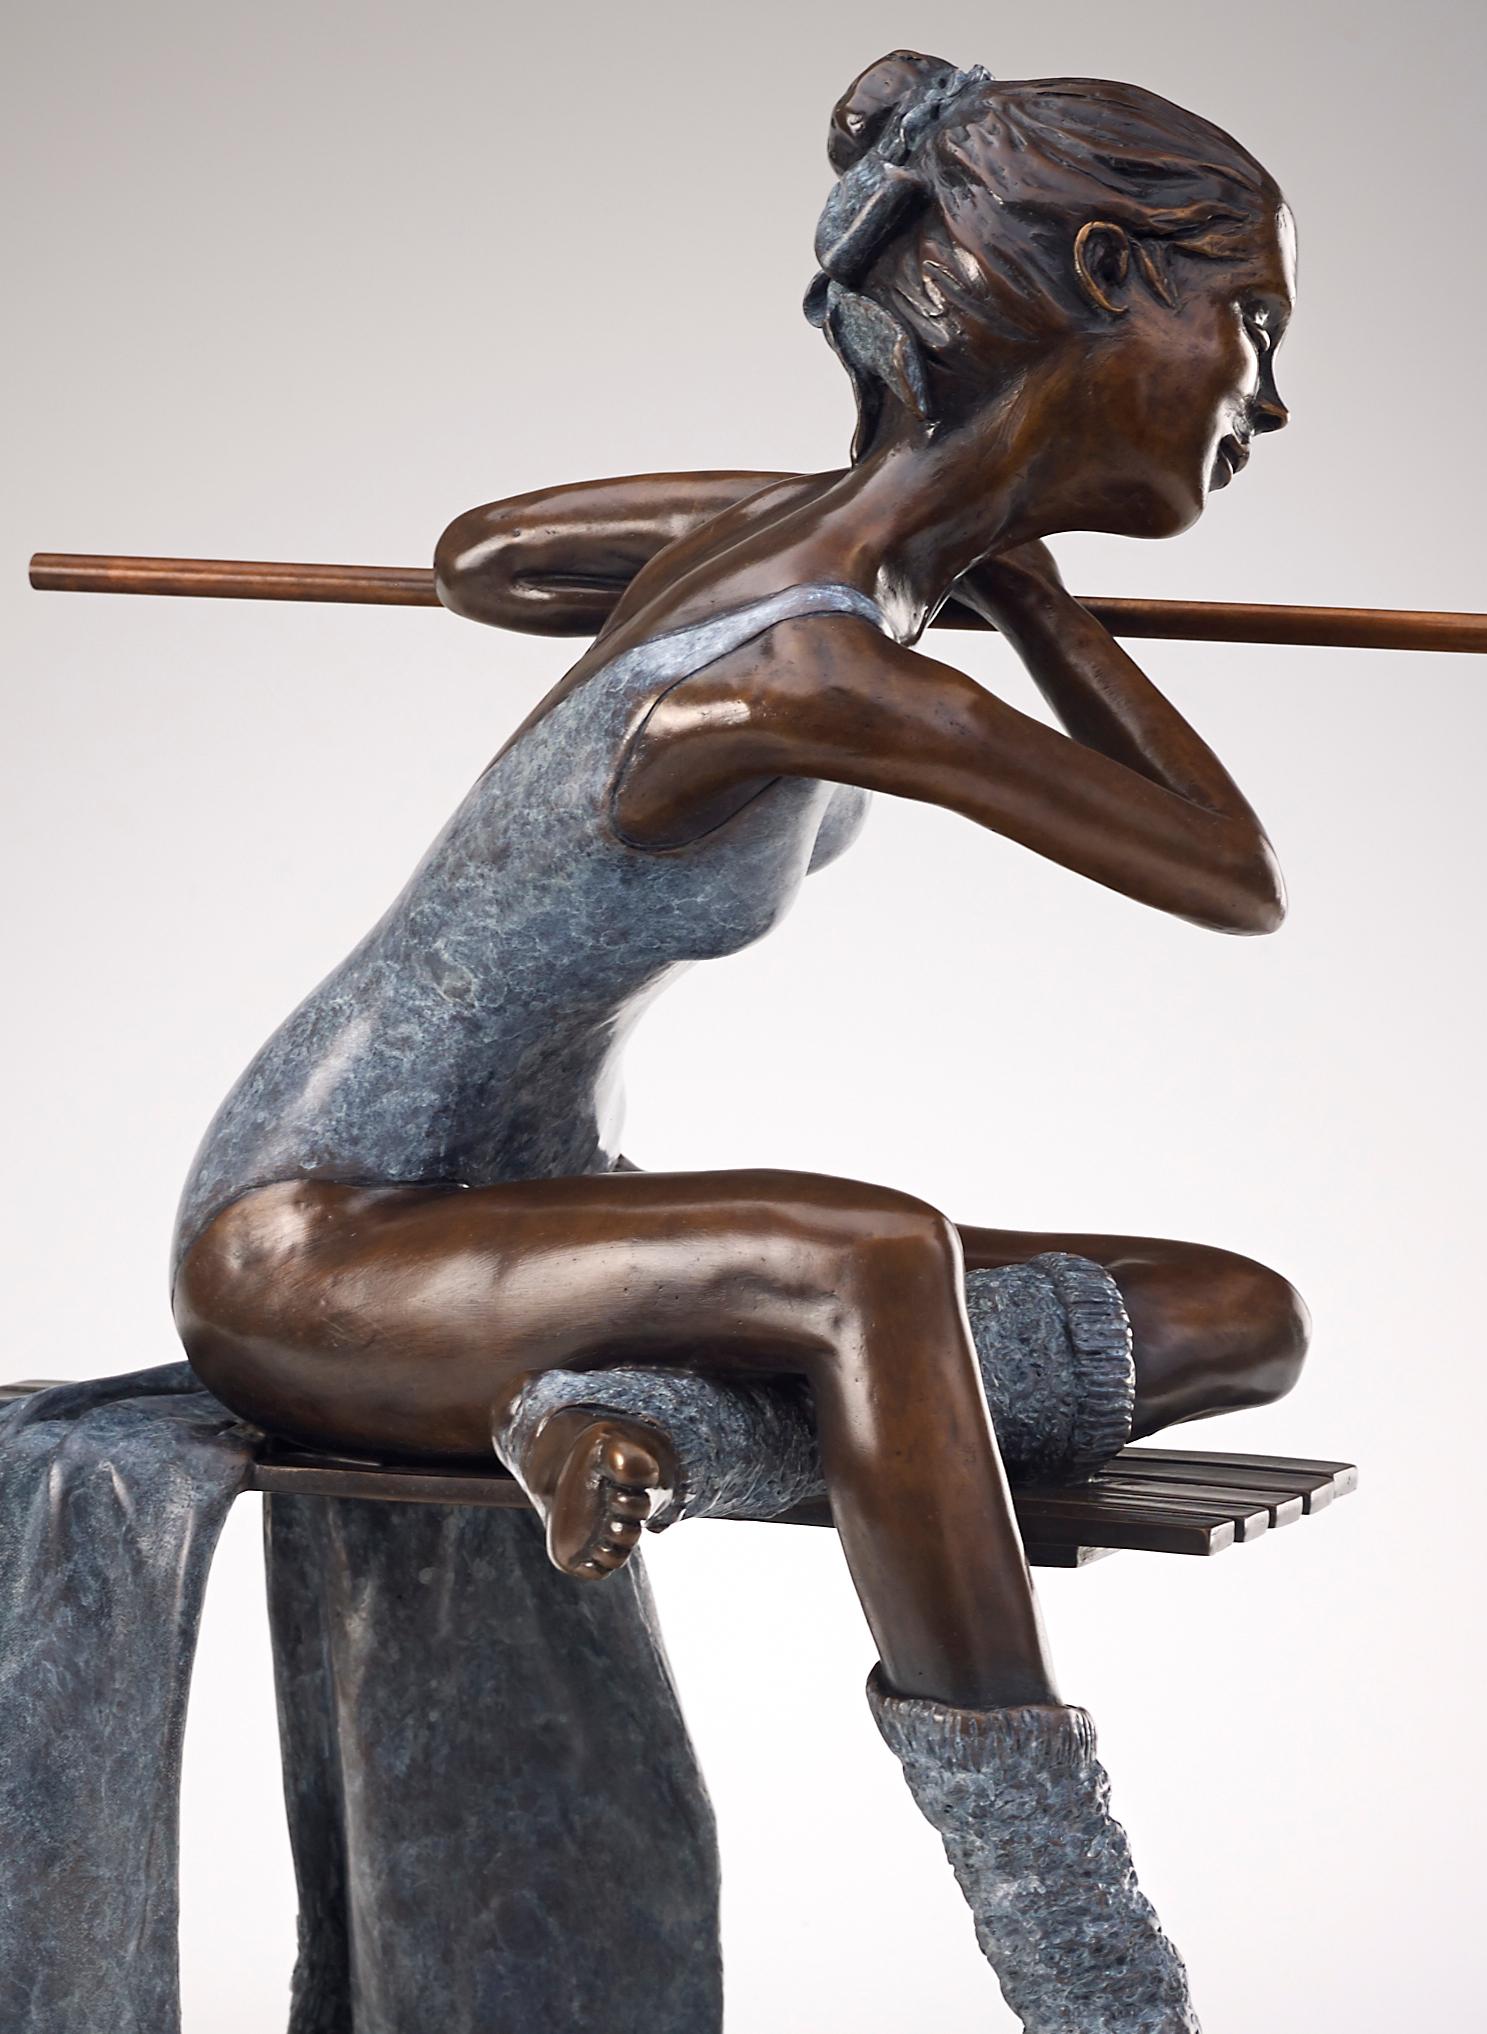 'Last Dance' by Benson Landes is a stunning 20th Century Solid Bronze Nude Figurative Ballet Dancer. For Benson Landes, sculpture was most definitely a passion. His oeuvre of cast bronzes is populated with ‘off duty’ ballet dancers, rather wistful